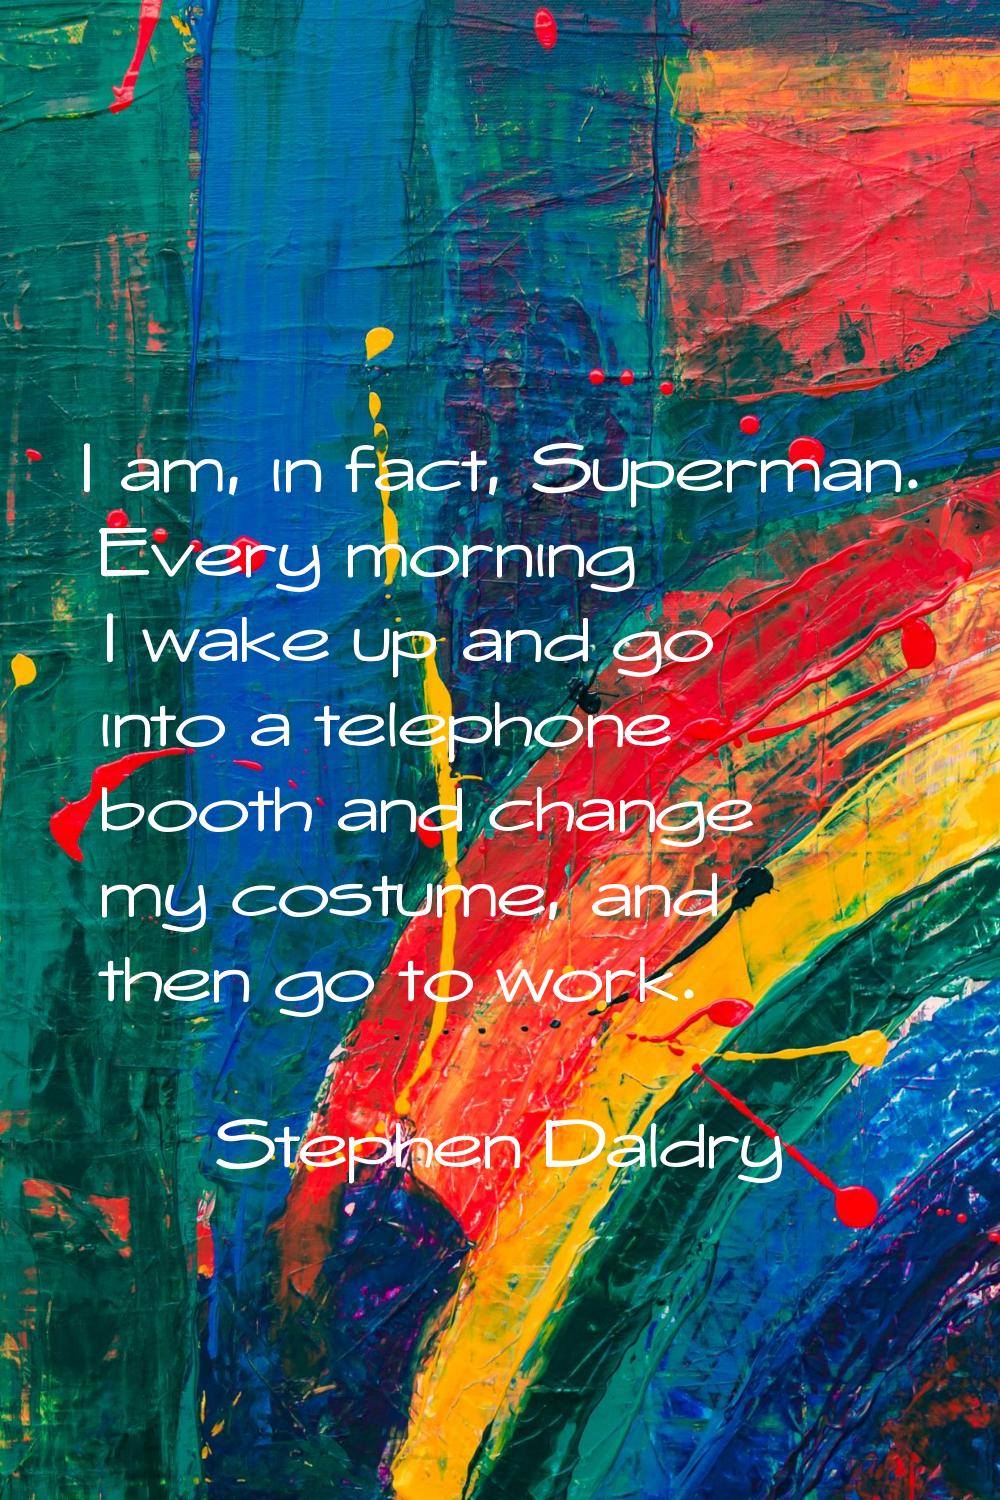 I am, in fact, Superman. Every morning I wake up and go into a telephone booth and change my costum